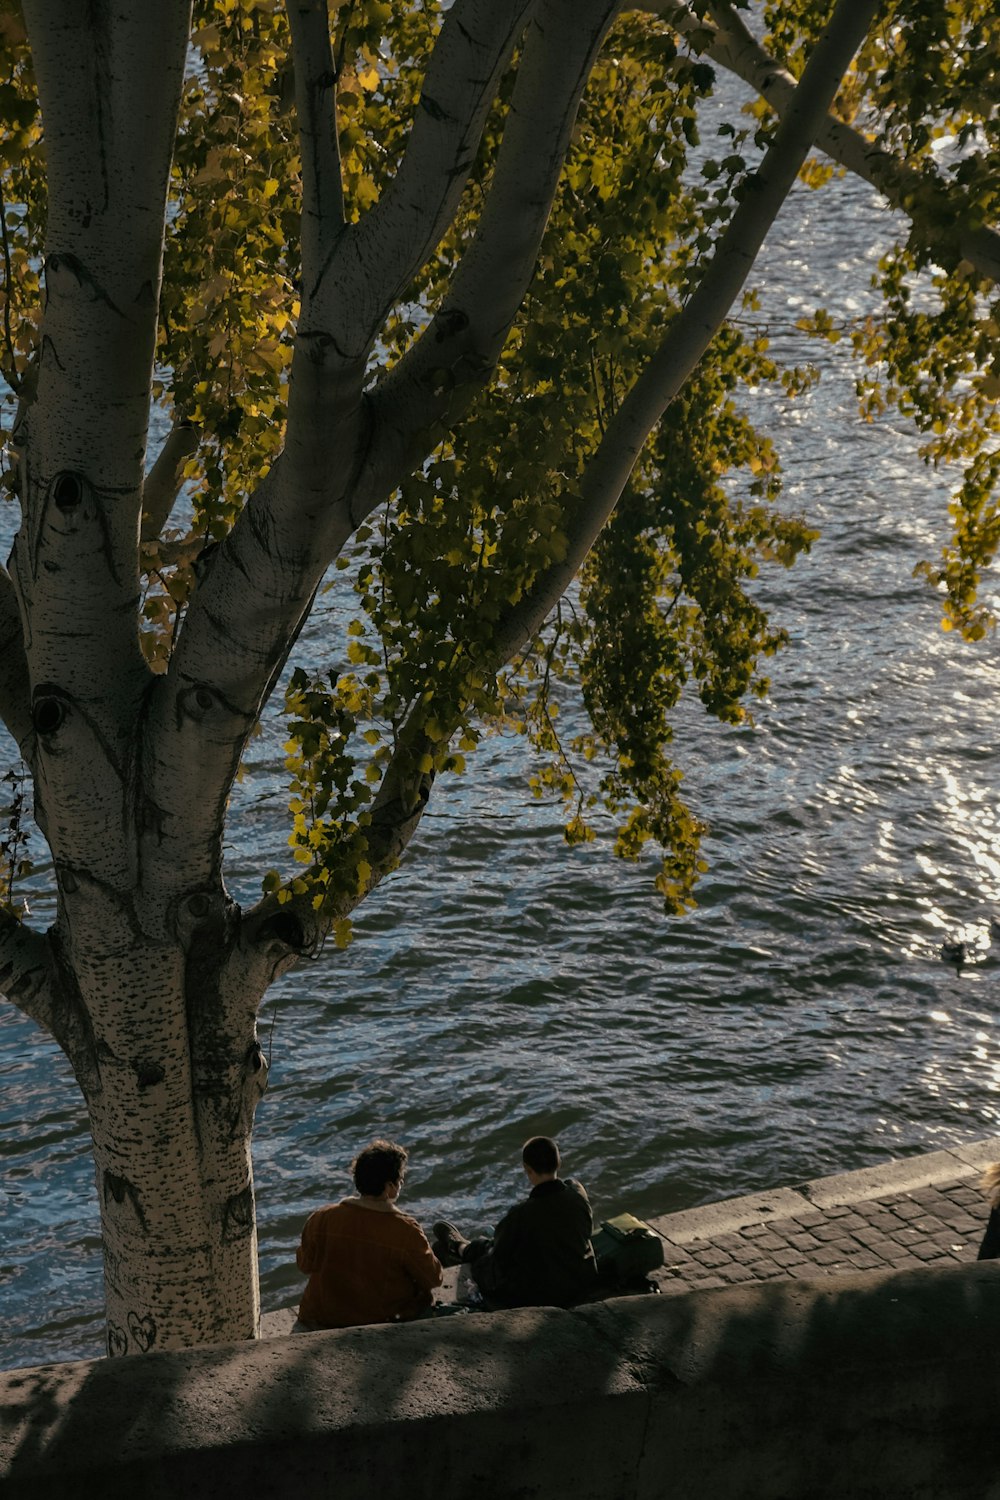 man and woman sitting on concrete bench near body of water during daytime